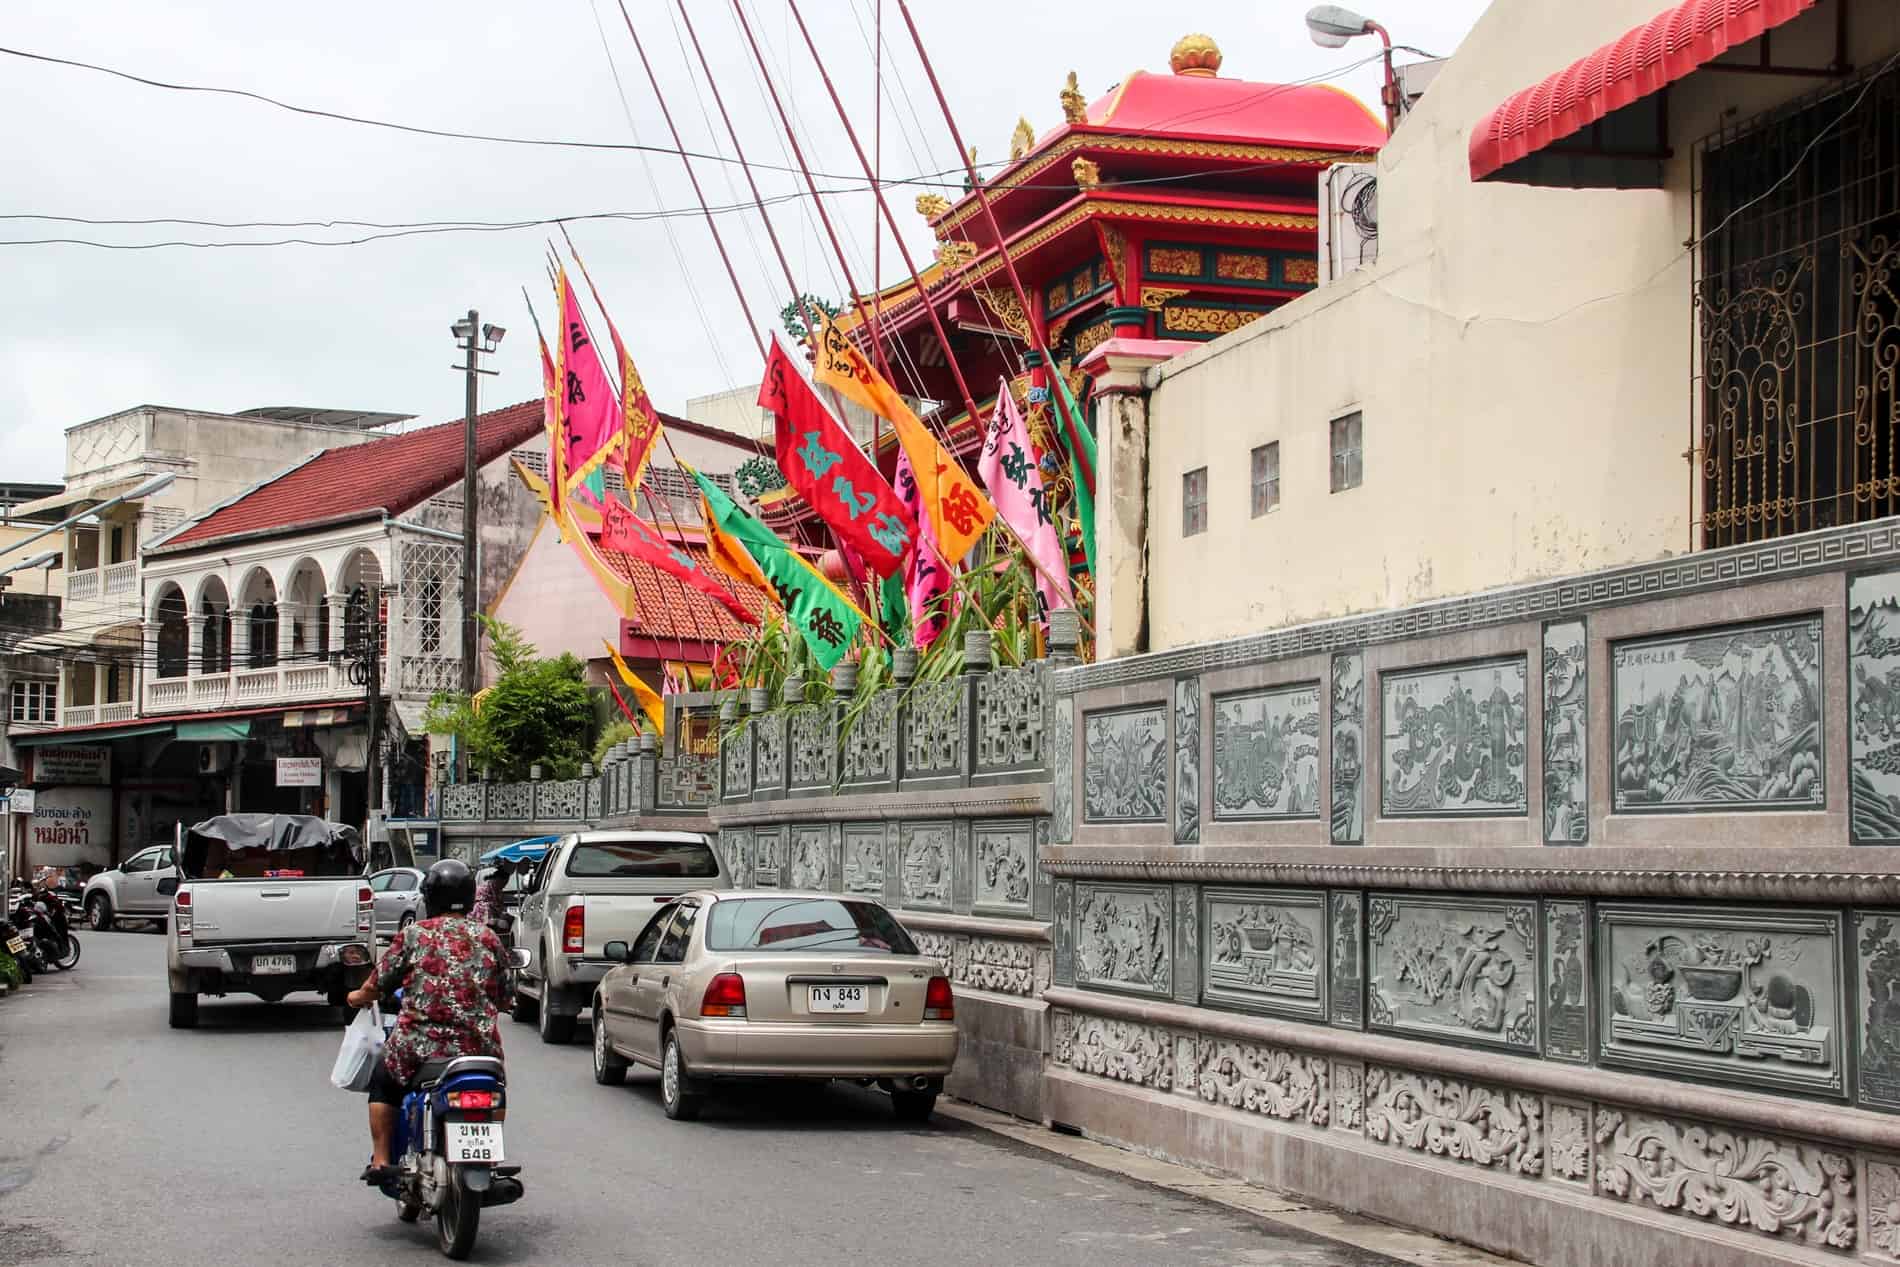 A woman on a motorbike and parked traffic on a street in Phuket with a red-roofed Chinese temple. 